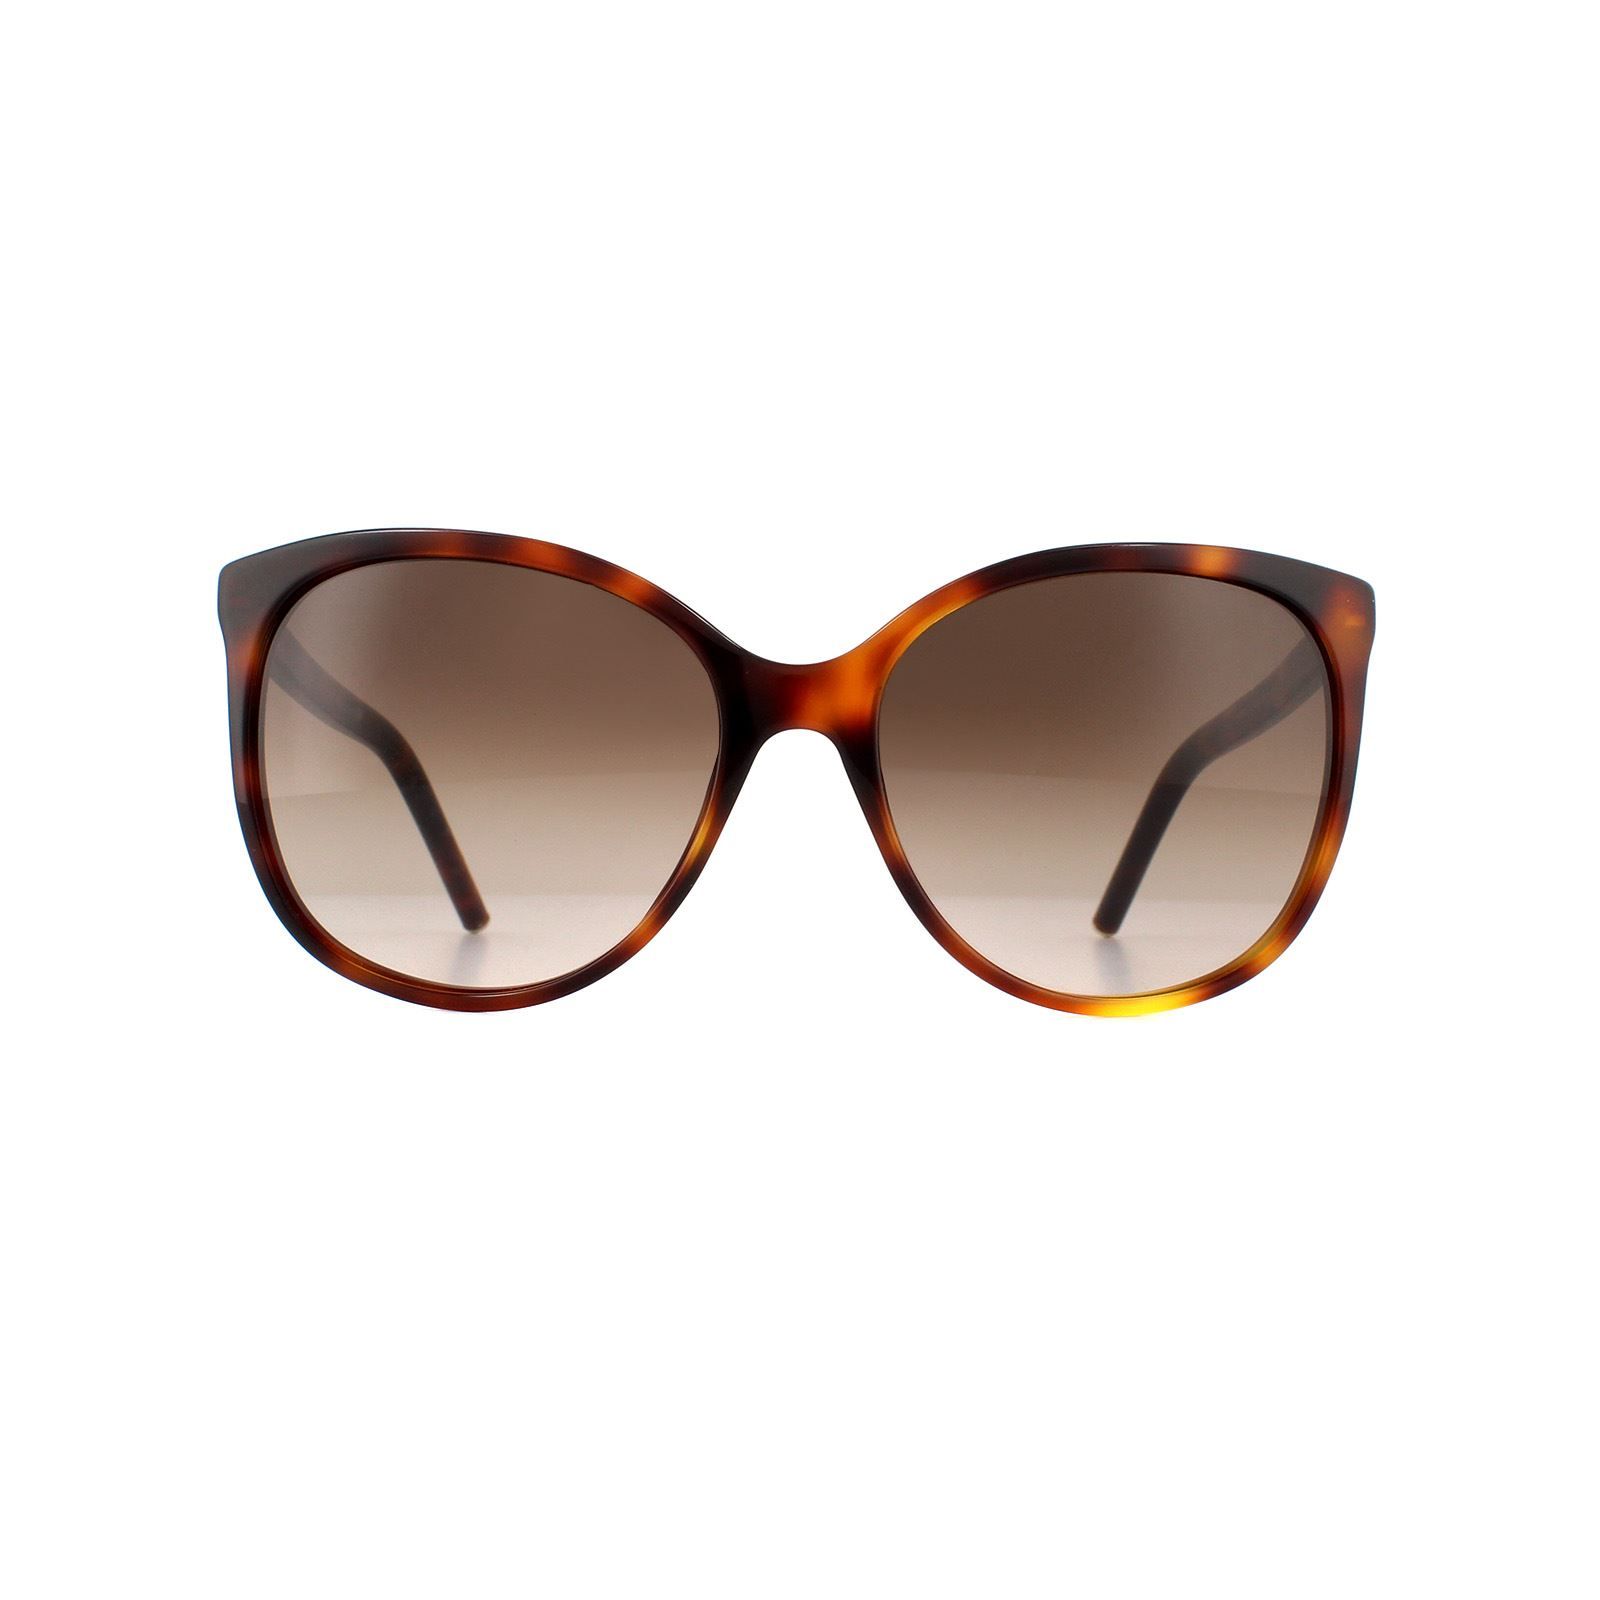 Marc Jacobs Sunglasses MARC 79/S 05L J6 Havana Brown Gradient are from the master of design Marc Jacobs who always brings a unique design ethos that is reflected well in the sunglasses collection. These trendy round shaped frames made of plastic are perfect for the modern fashionable woman.